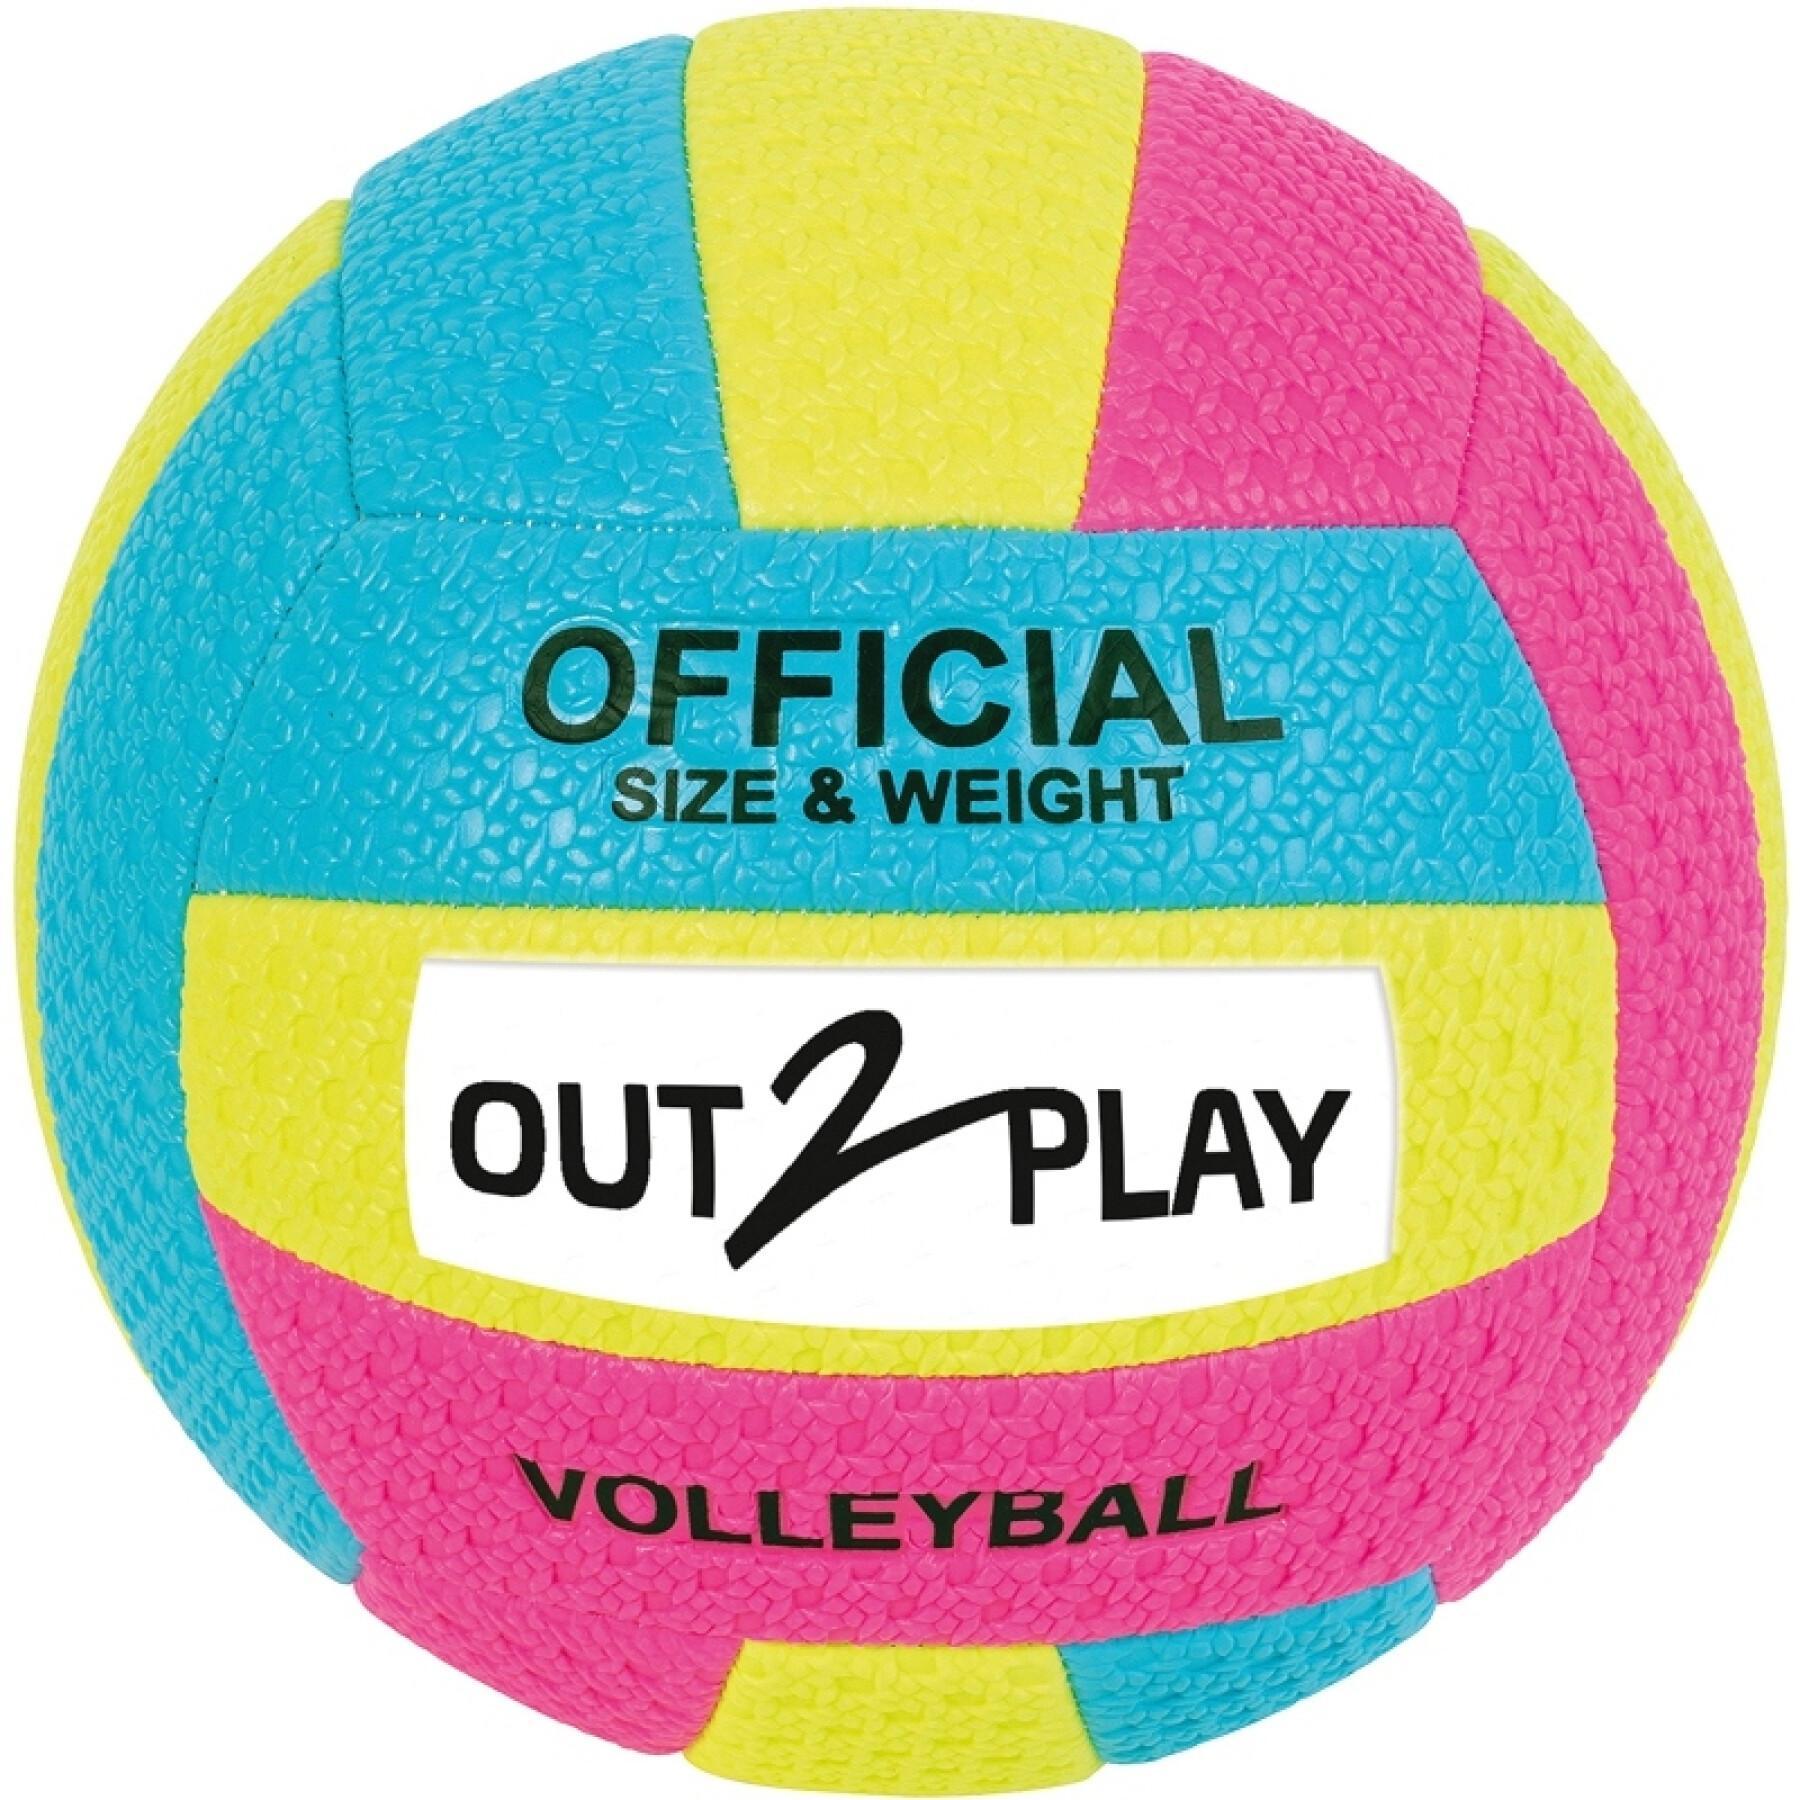 Out2Play O2P Volleyball